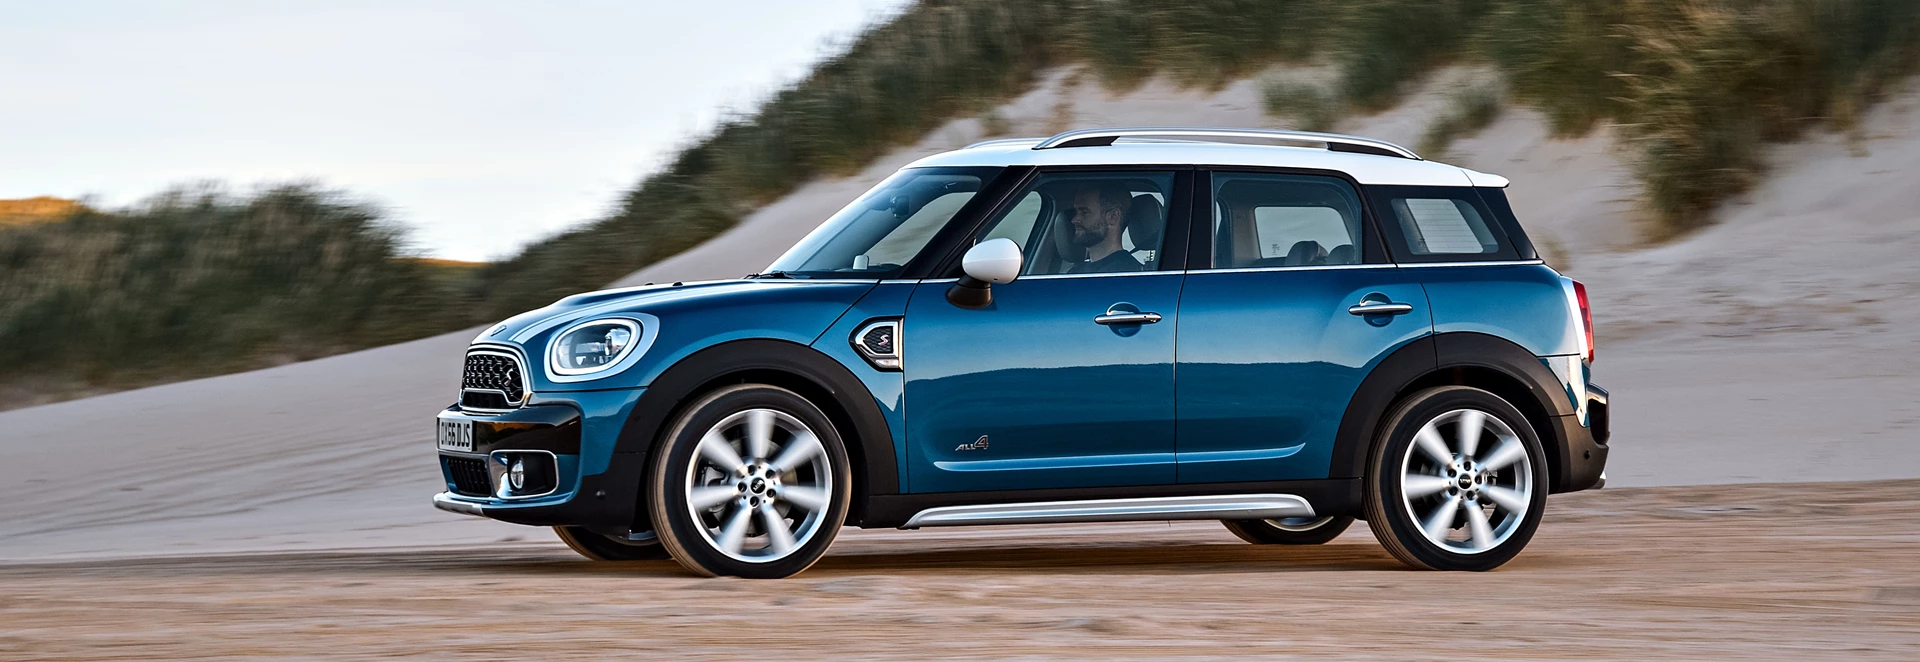 Why the Mini Countryman should be on your next fleet